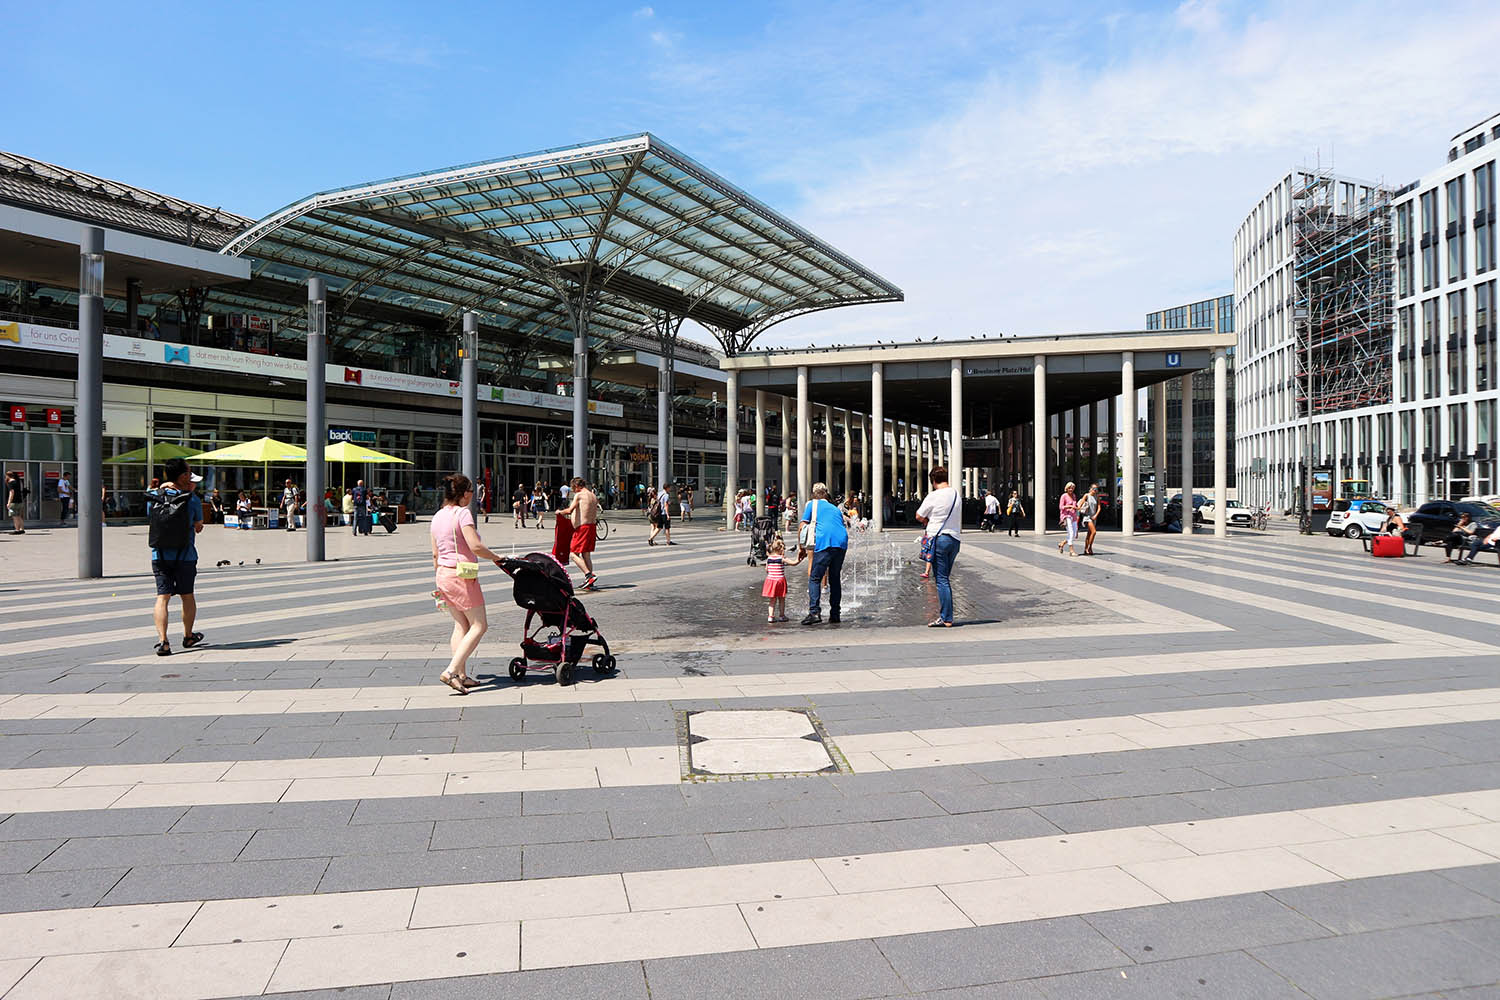 Breslauer Platz, Completion of the New Design, 2013. Designed by Büder + Metzel Architekten, Brühl/Cologne. Breslauer Platz is a square on the northeast side of the central train station. The transformation into an urban space took some time. The work done by Kai Büder and Manfred Metzel resulted in greater transparency and a clearly designed, public space with more room for pedestrians. Under each of the three column-supported pavilion roofs of the station, a weather-protected extension of the front plaza areas has arisen, as an entrance to the subway station and to the central train station. 